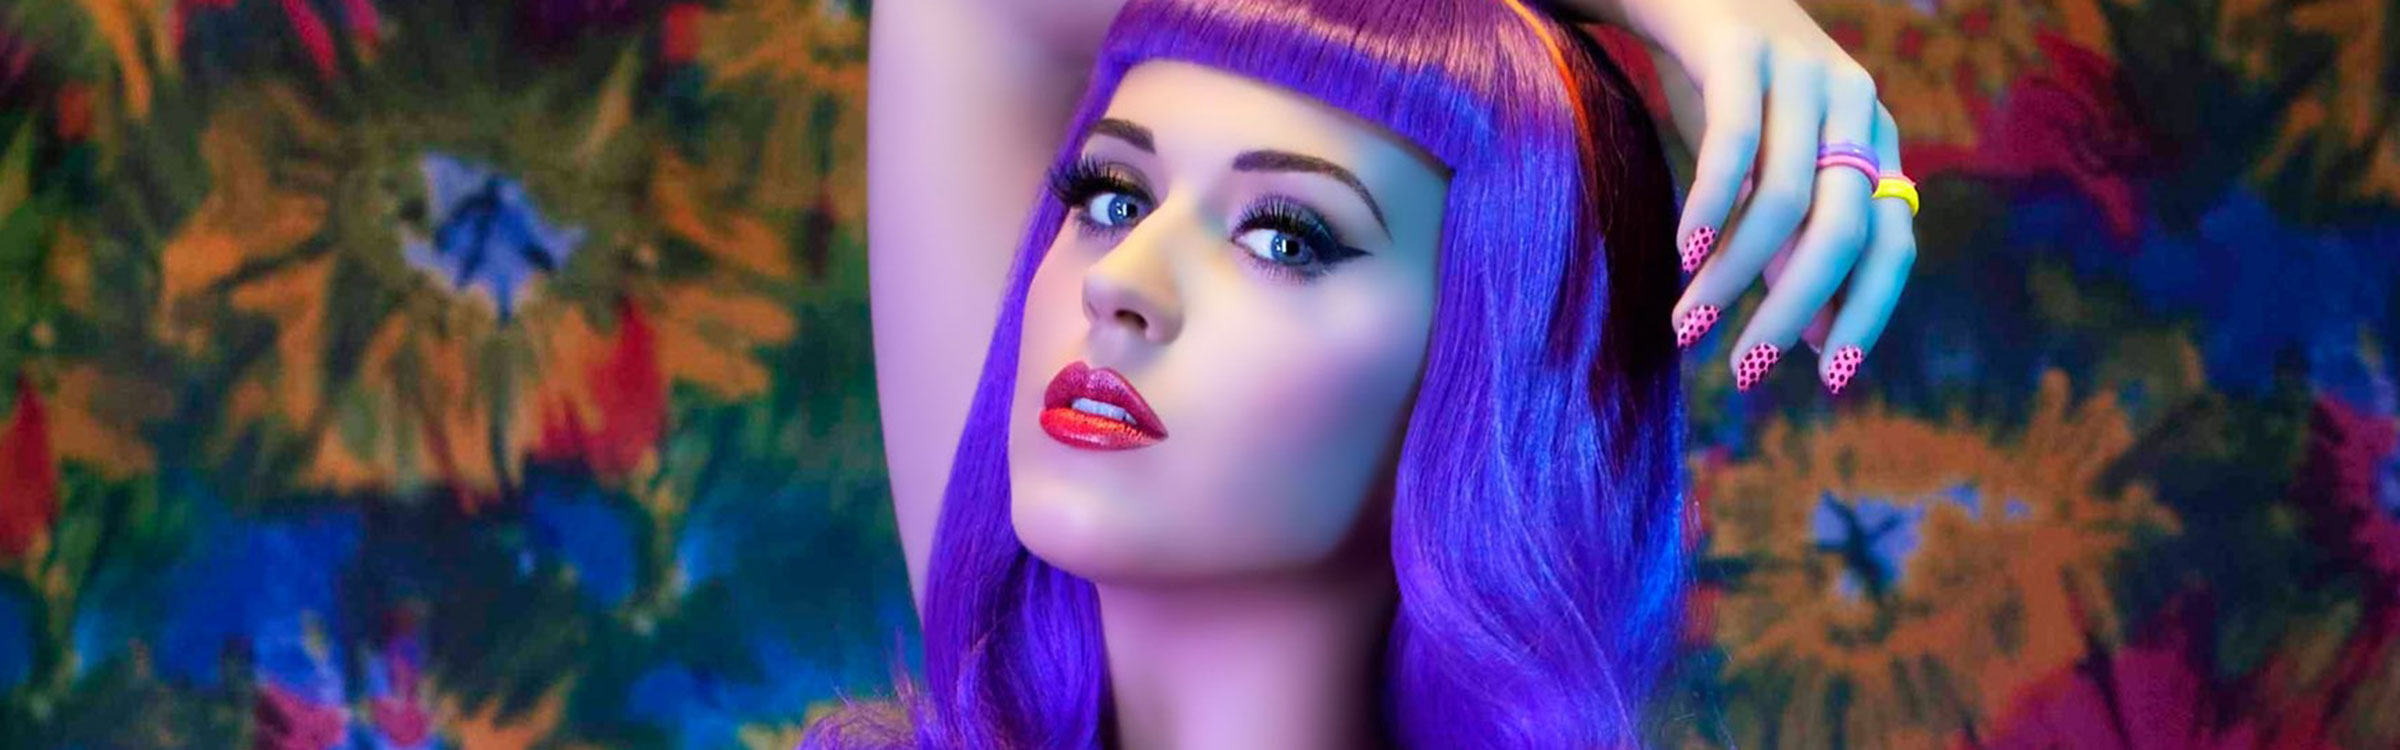 Katy perry fluo